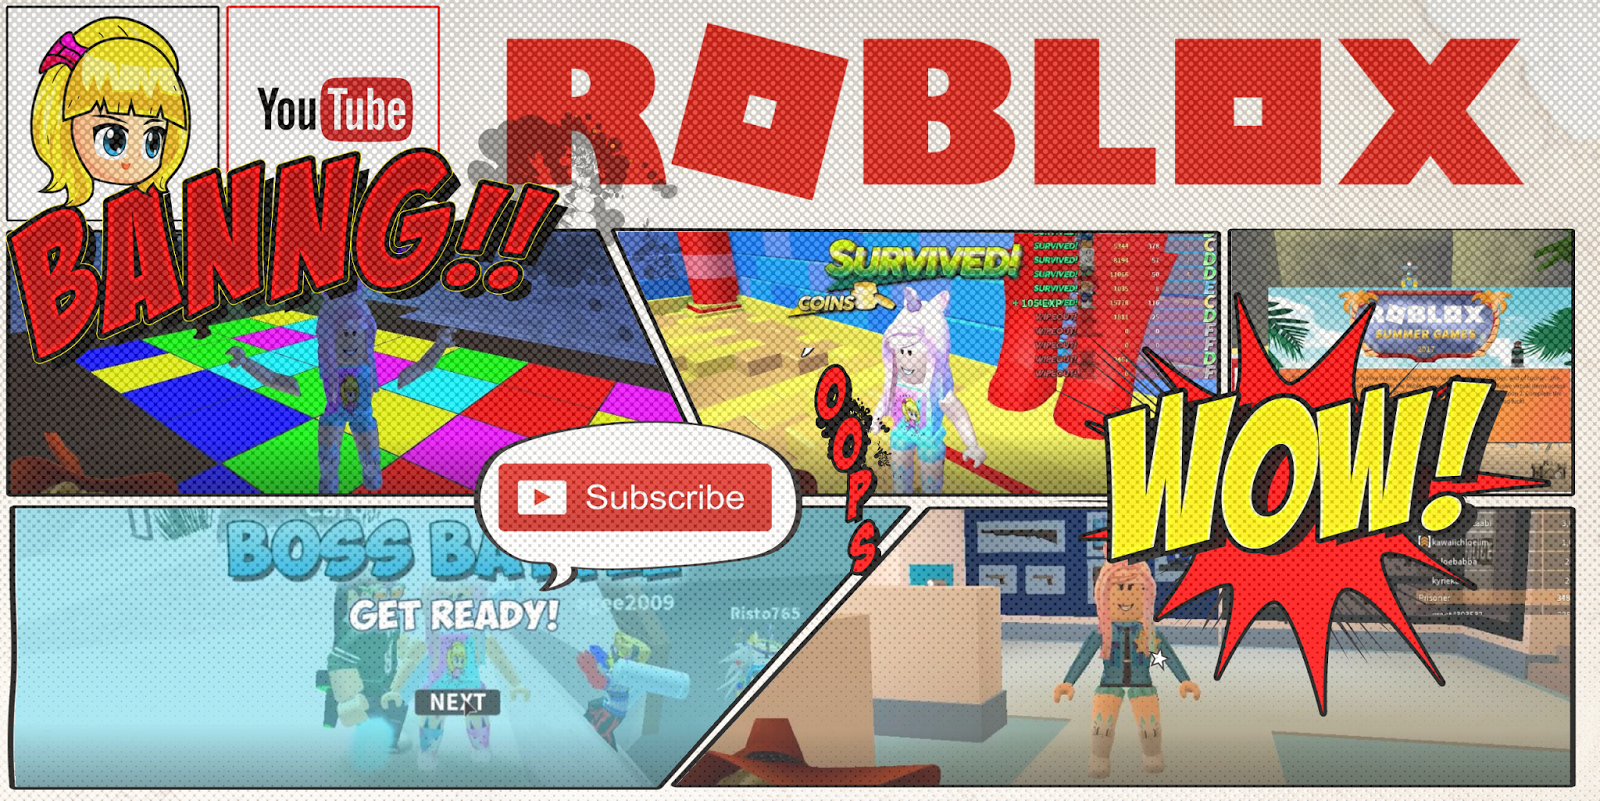 Roblox Gameplay 3 Eggs Getting The Chaotic Egg Of Catastrophes Eggs On Ice Tallaheggsee Zombie Slayer Easter Egg Hunt 2019 Steemit - how to get the tallaheggsee zombie slayer egg roblox egg hunt 2019 zombie rush